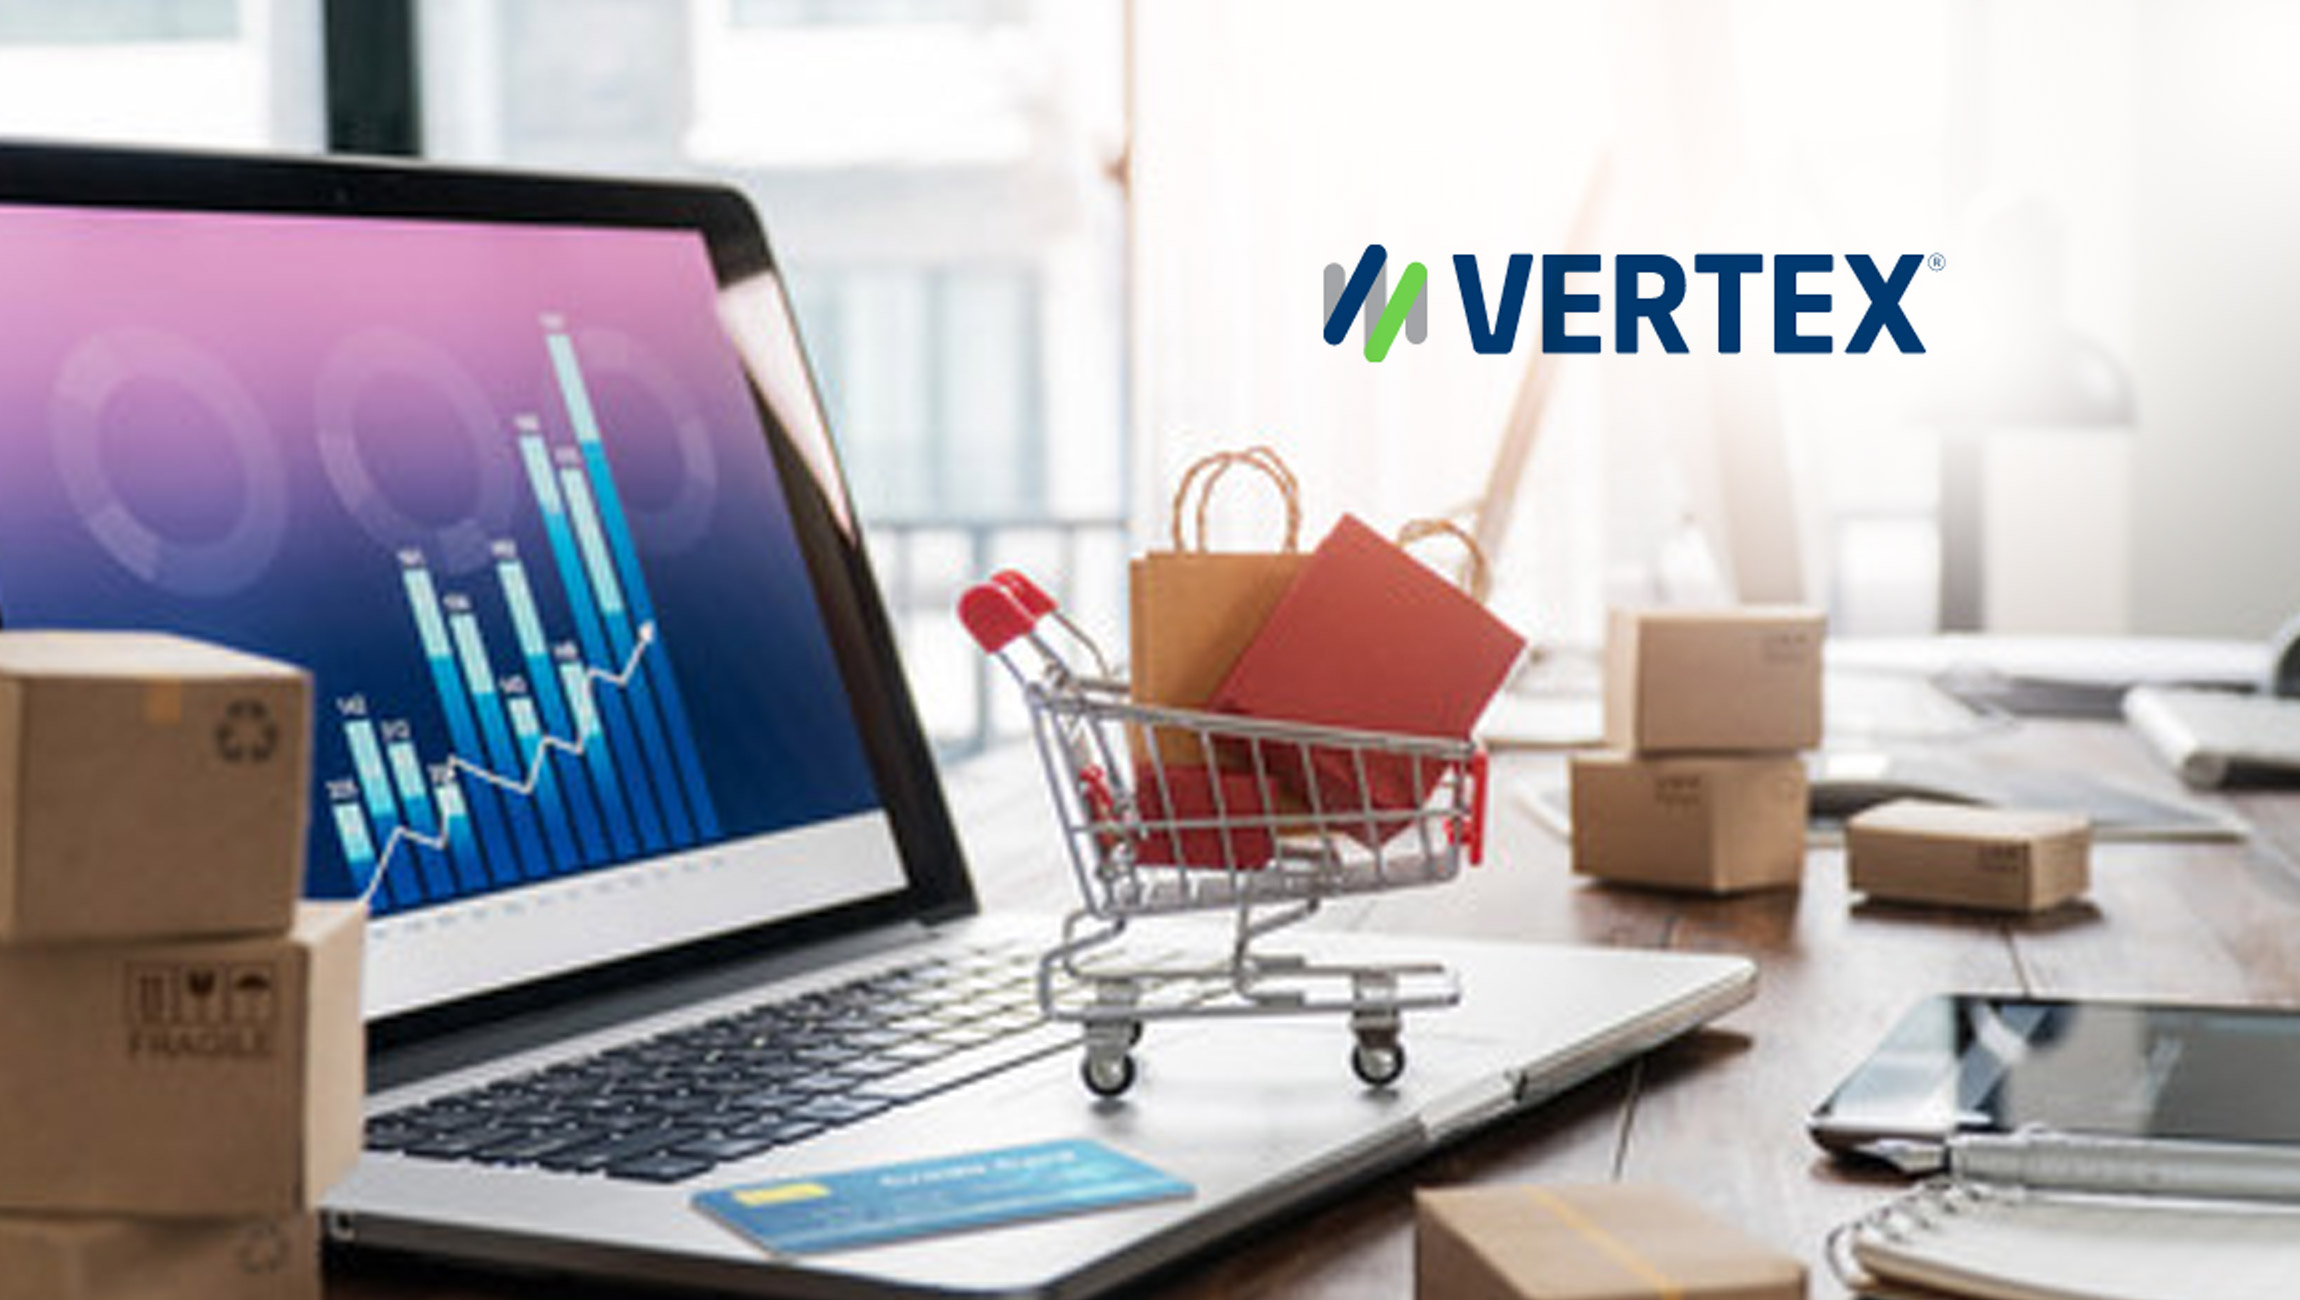 Vertex Research Finds UKI e-Commerce Businesses are Falling Behind EU and US Counterparts in the Digital Transformation Race